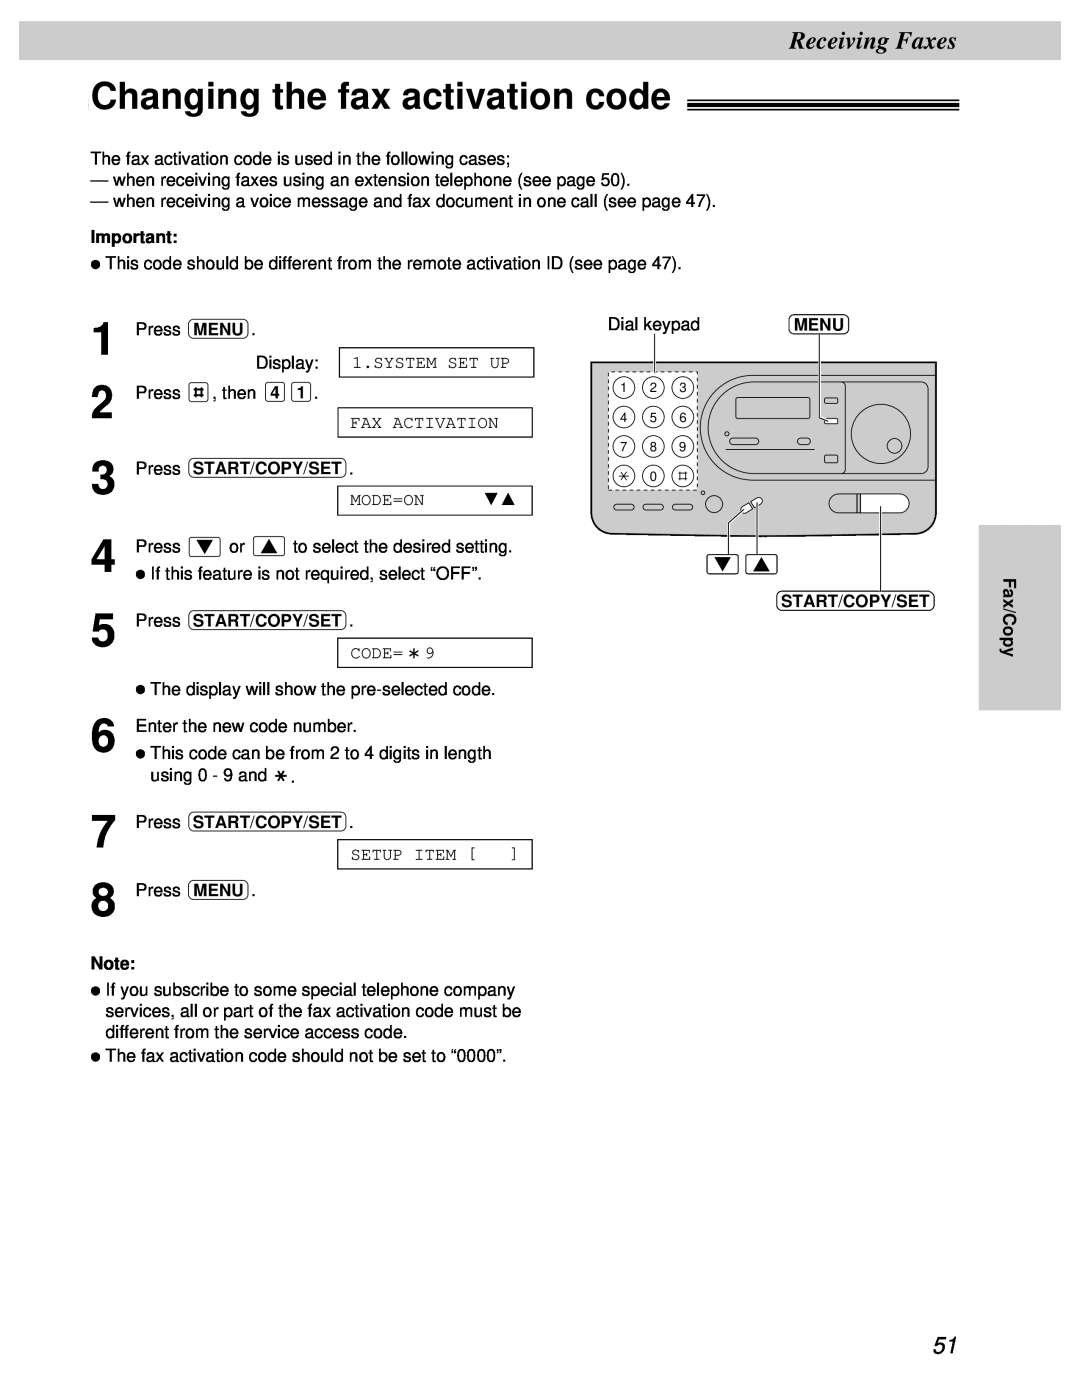 Panasonic KX-FT31BX quick start Changing the fax activation code, Receiving Faxes, Mode=On 